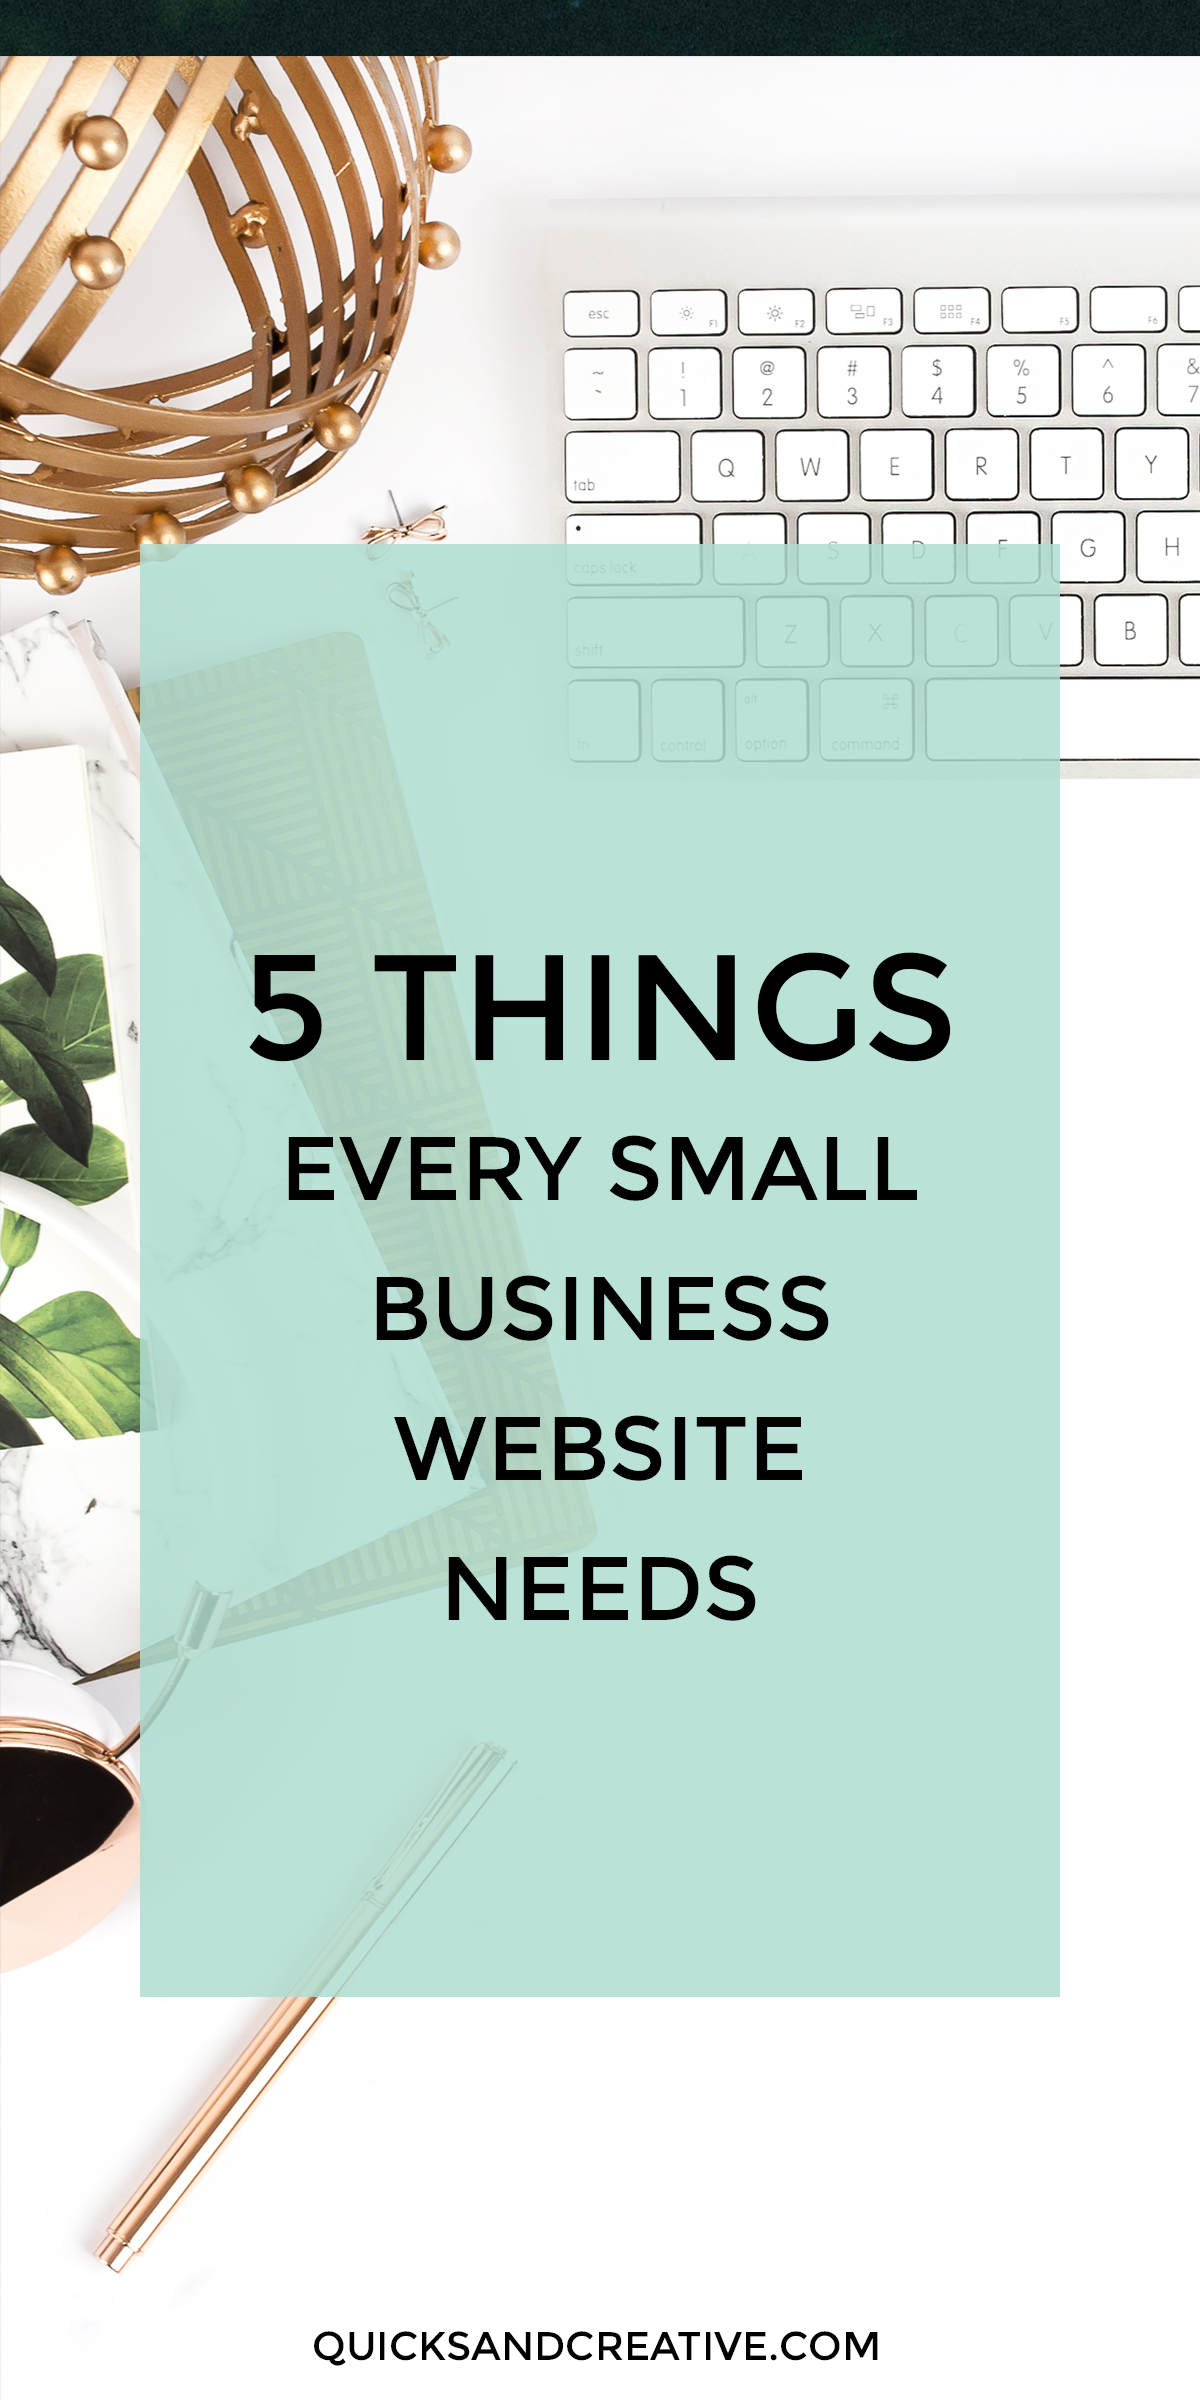 5 things every small business website needs